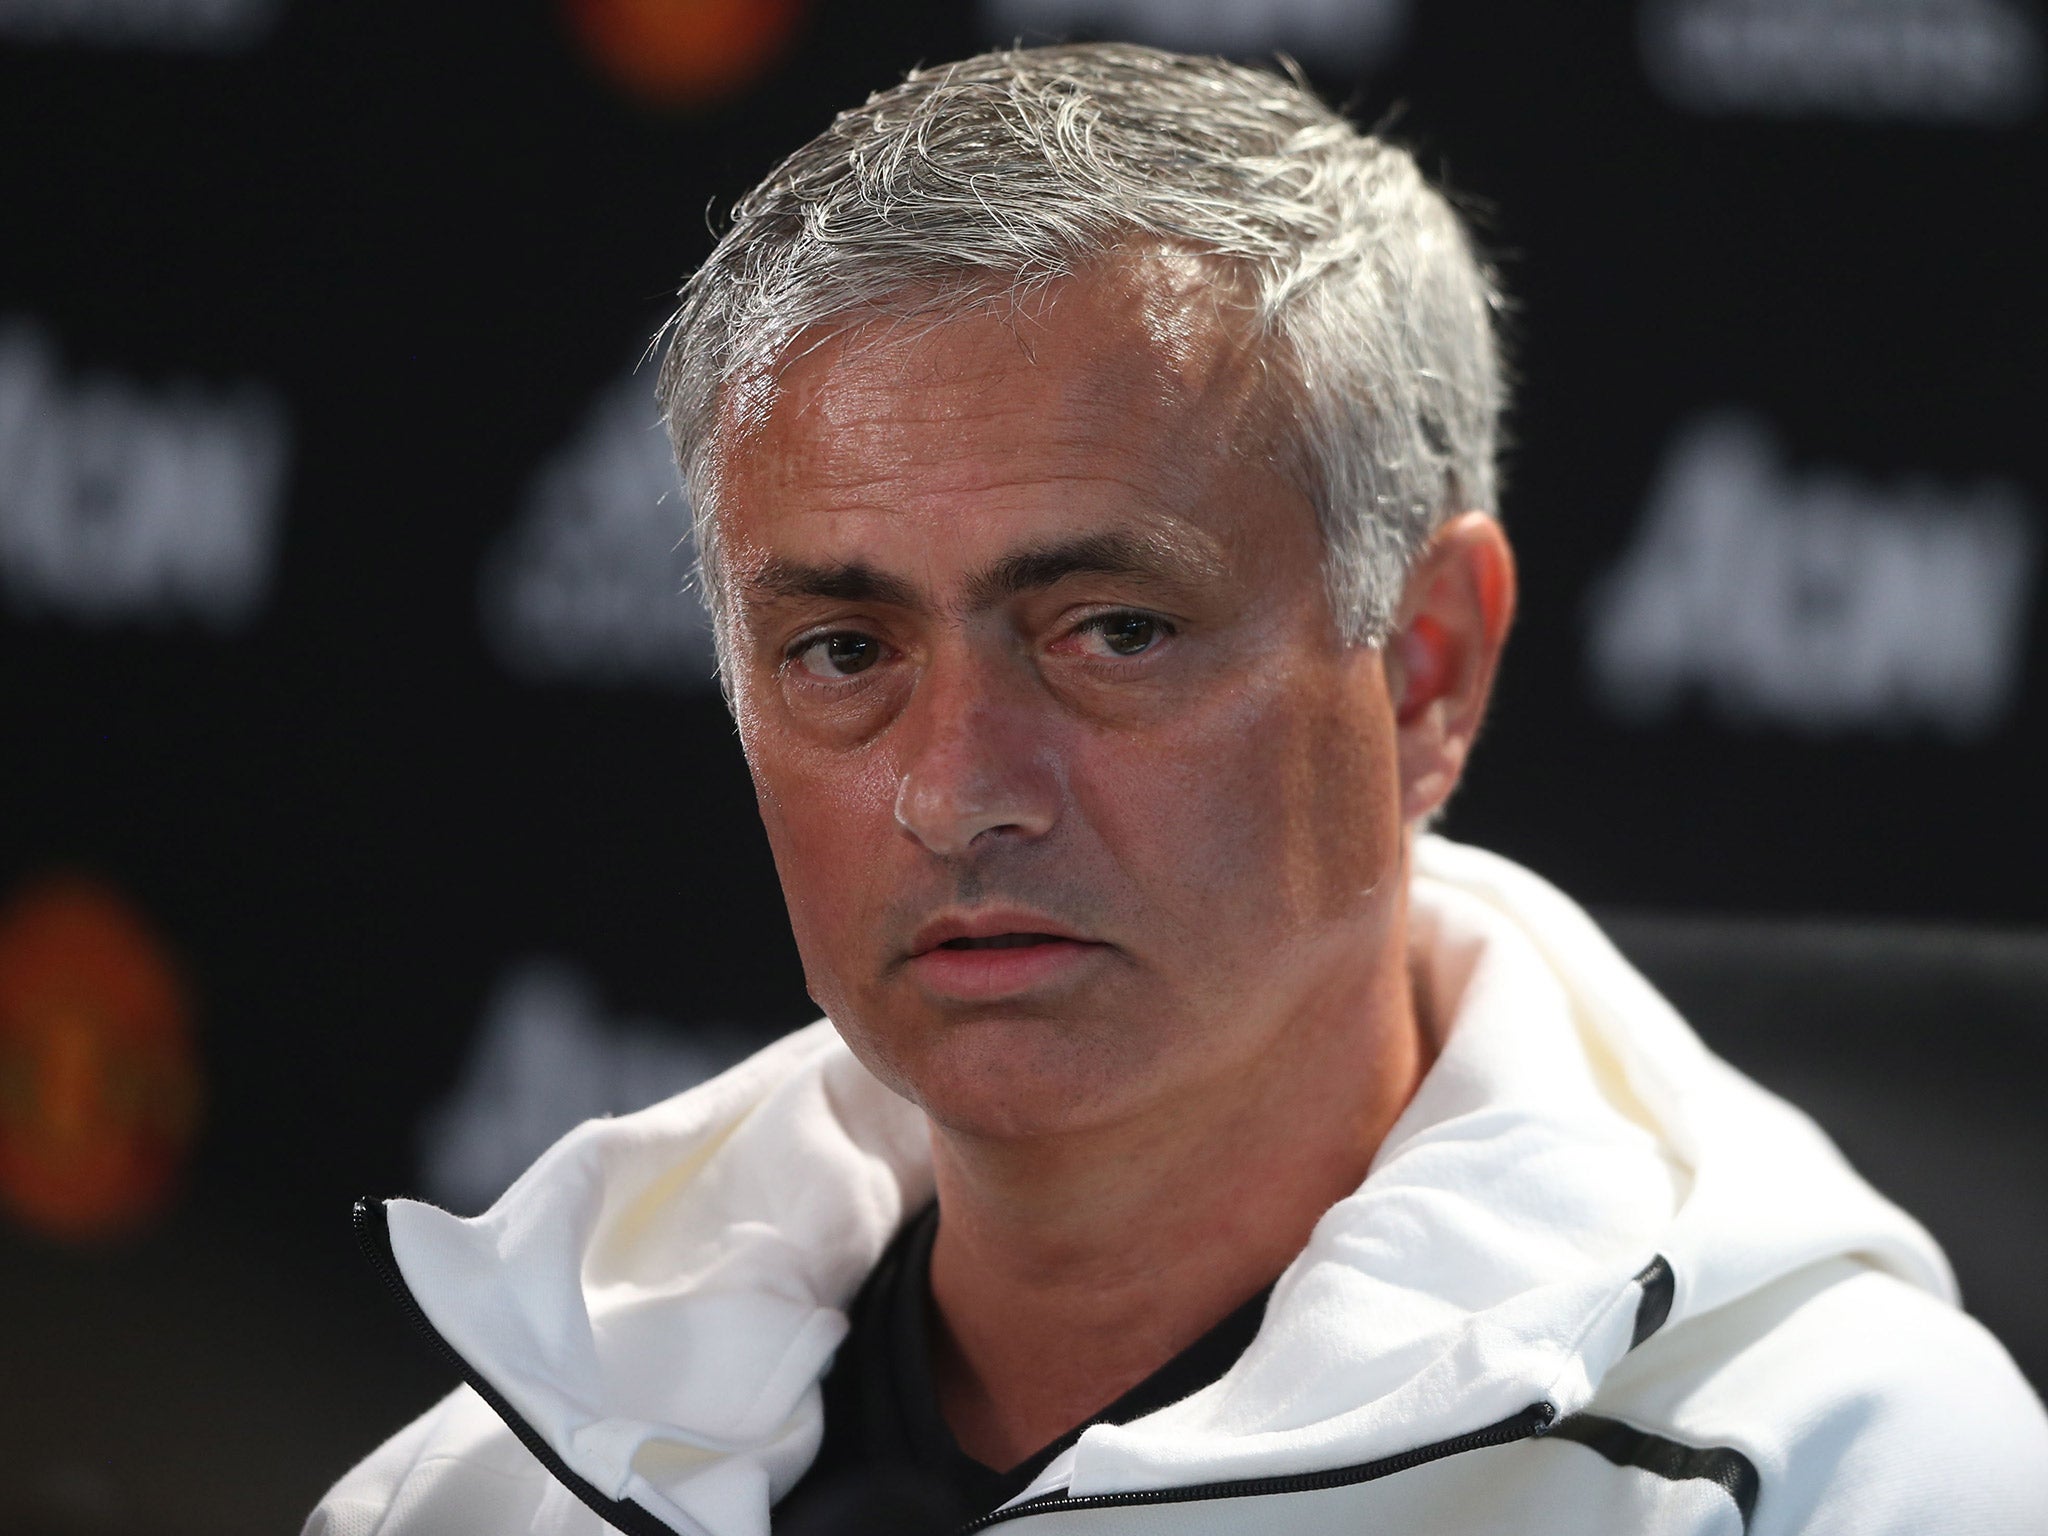 Jose Mourinho has spoken ahead of Saturday's eagerly anticipated Manchester derby